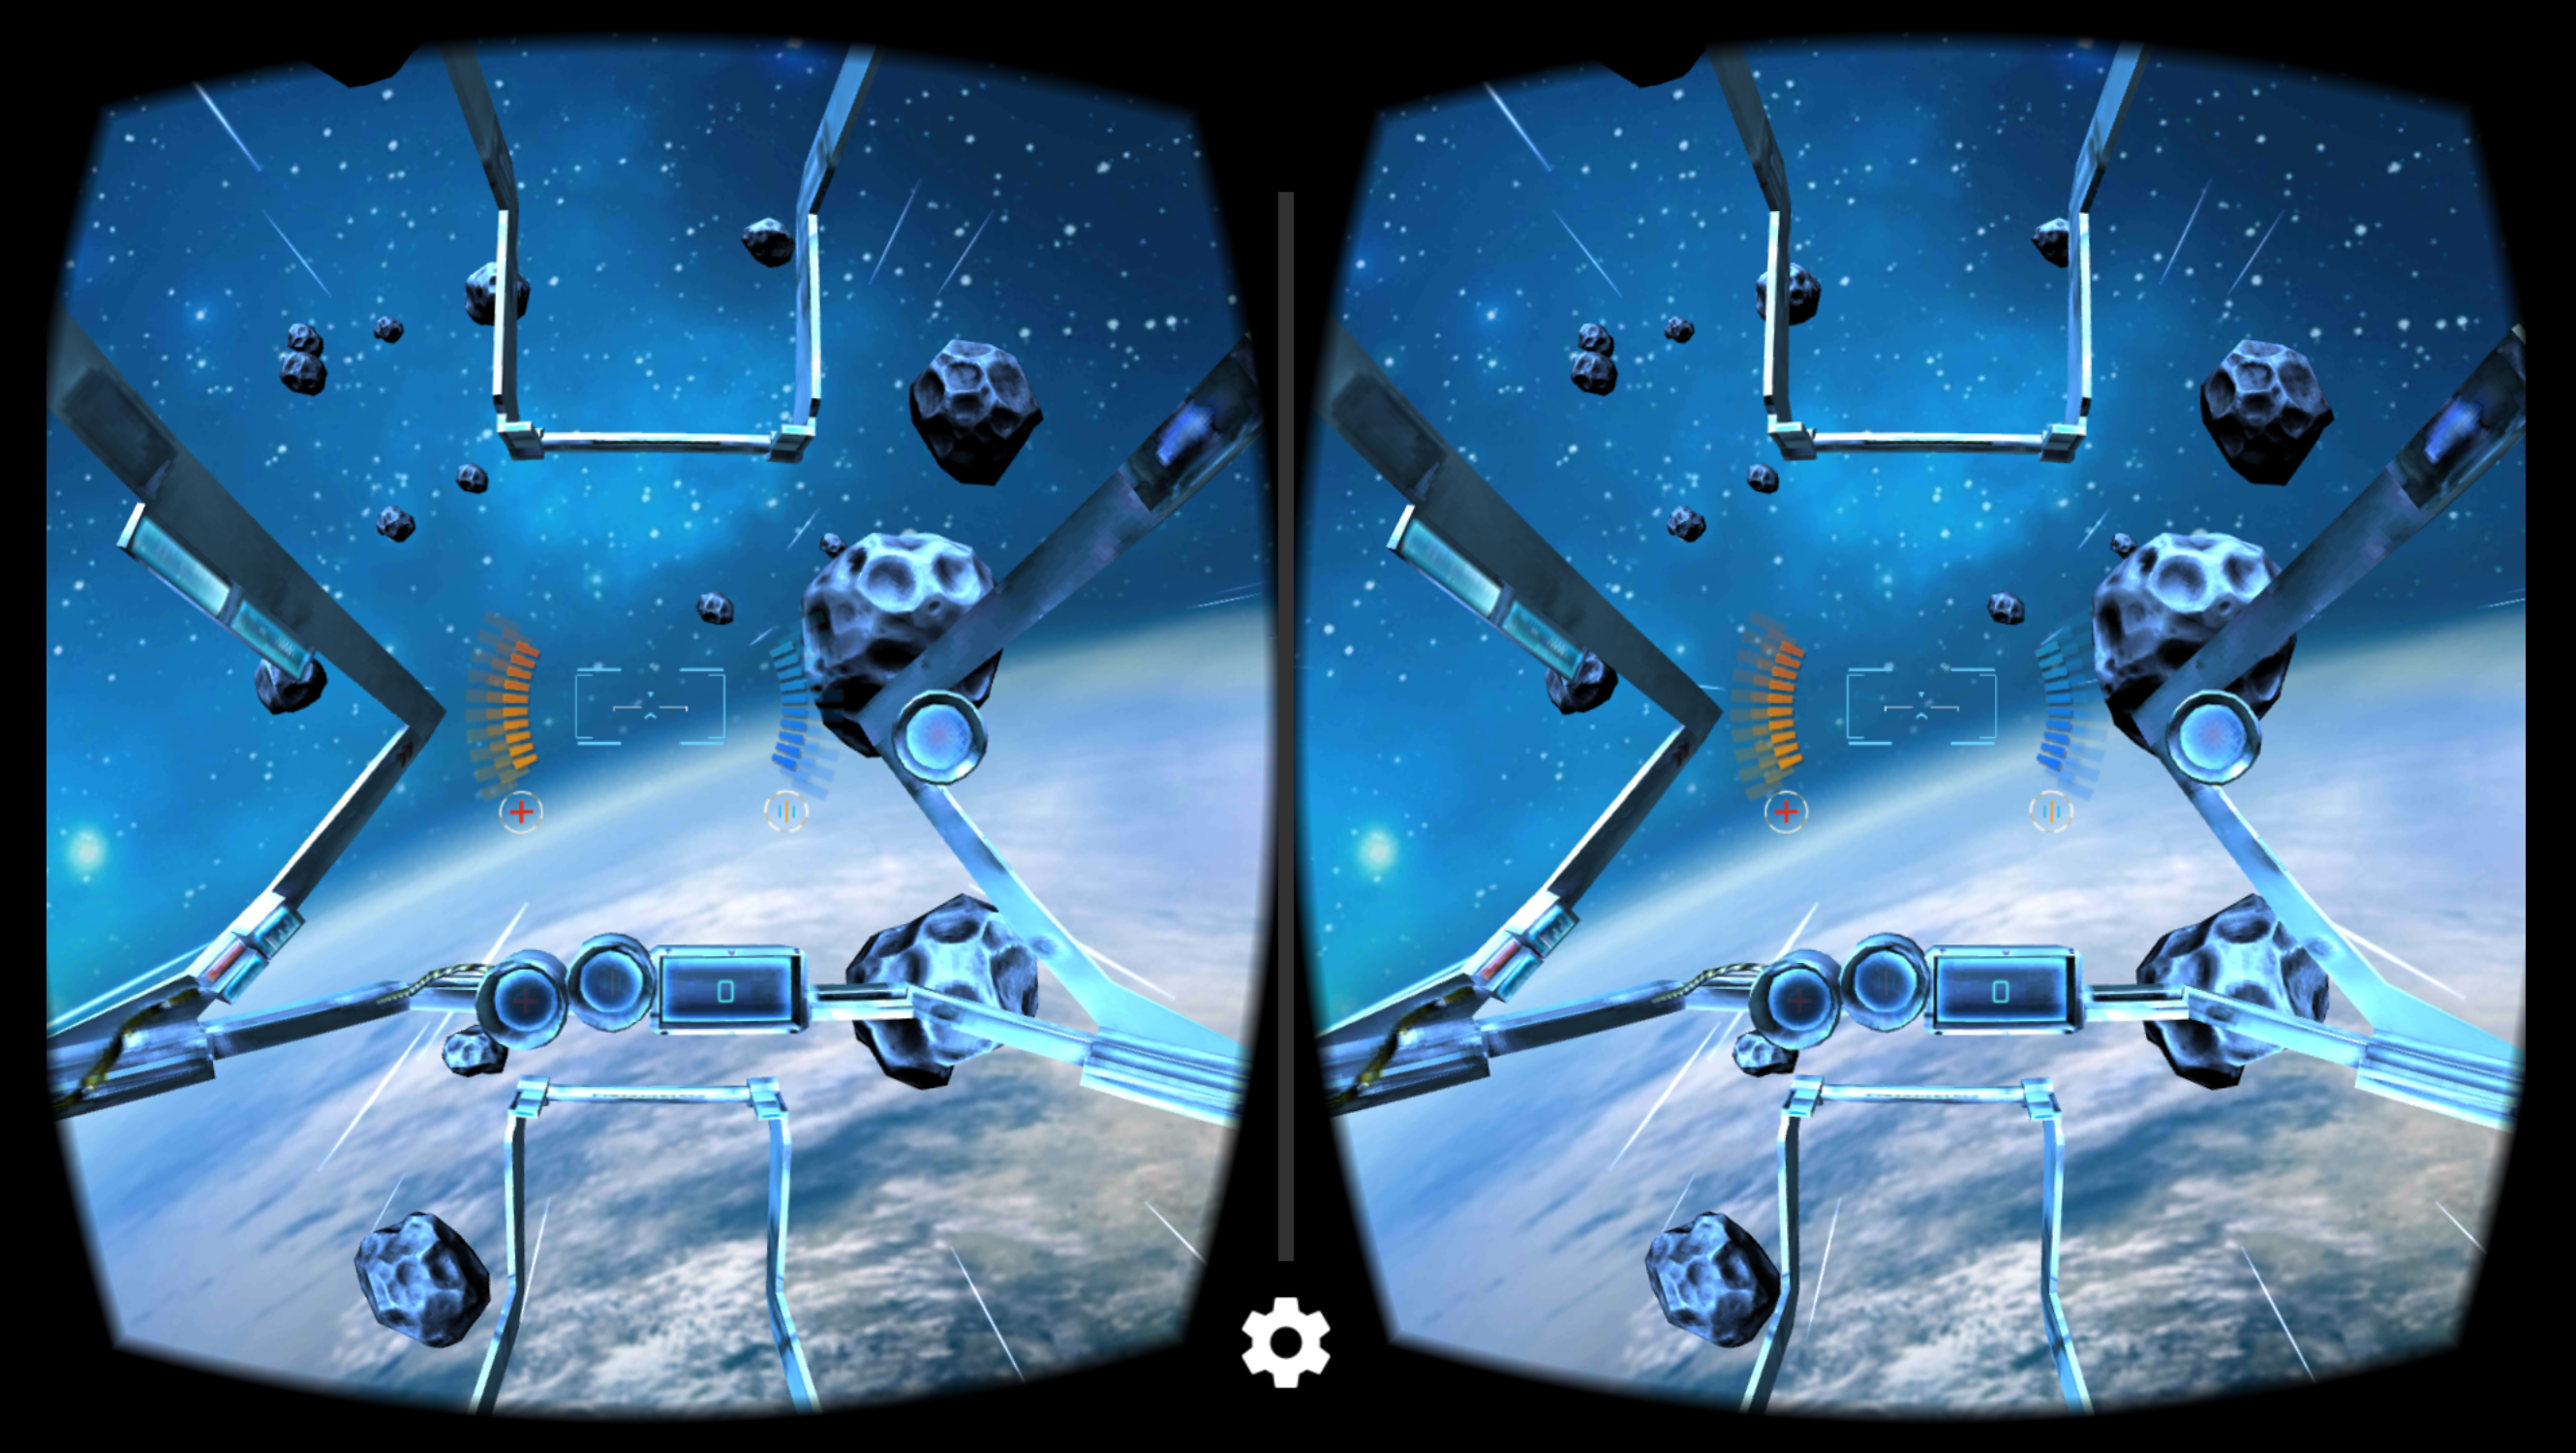 vr headset games for iphone